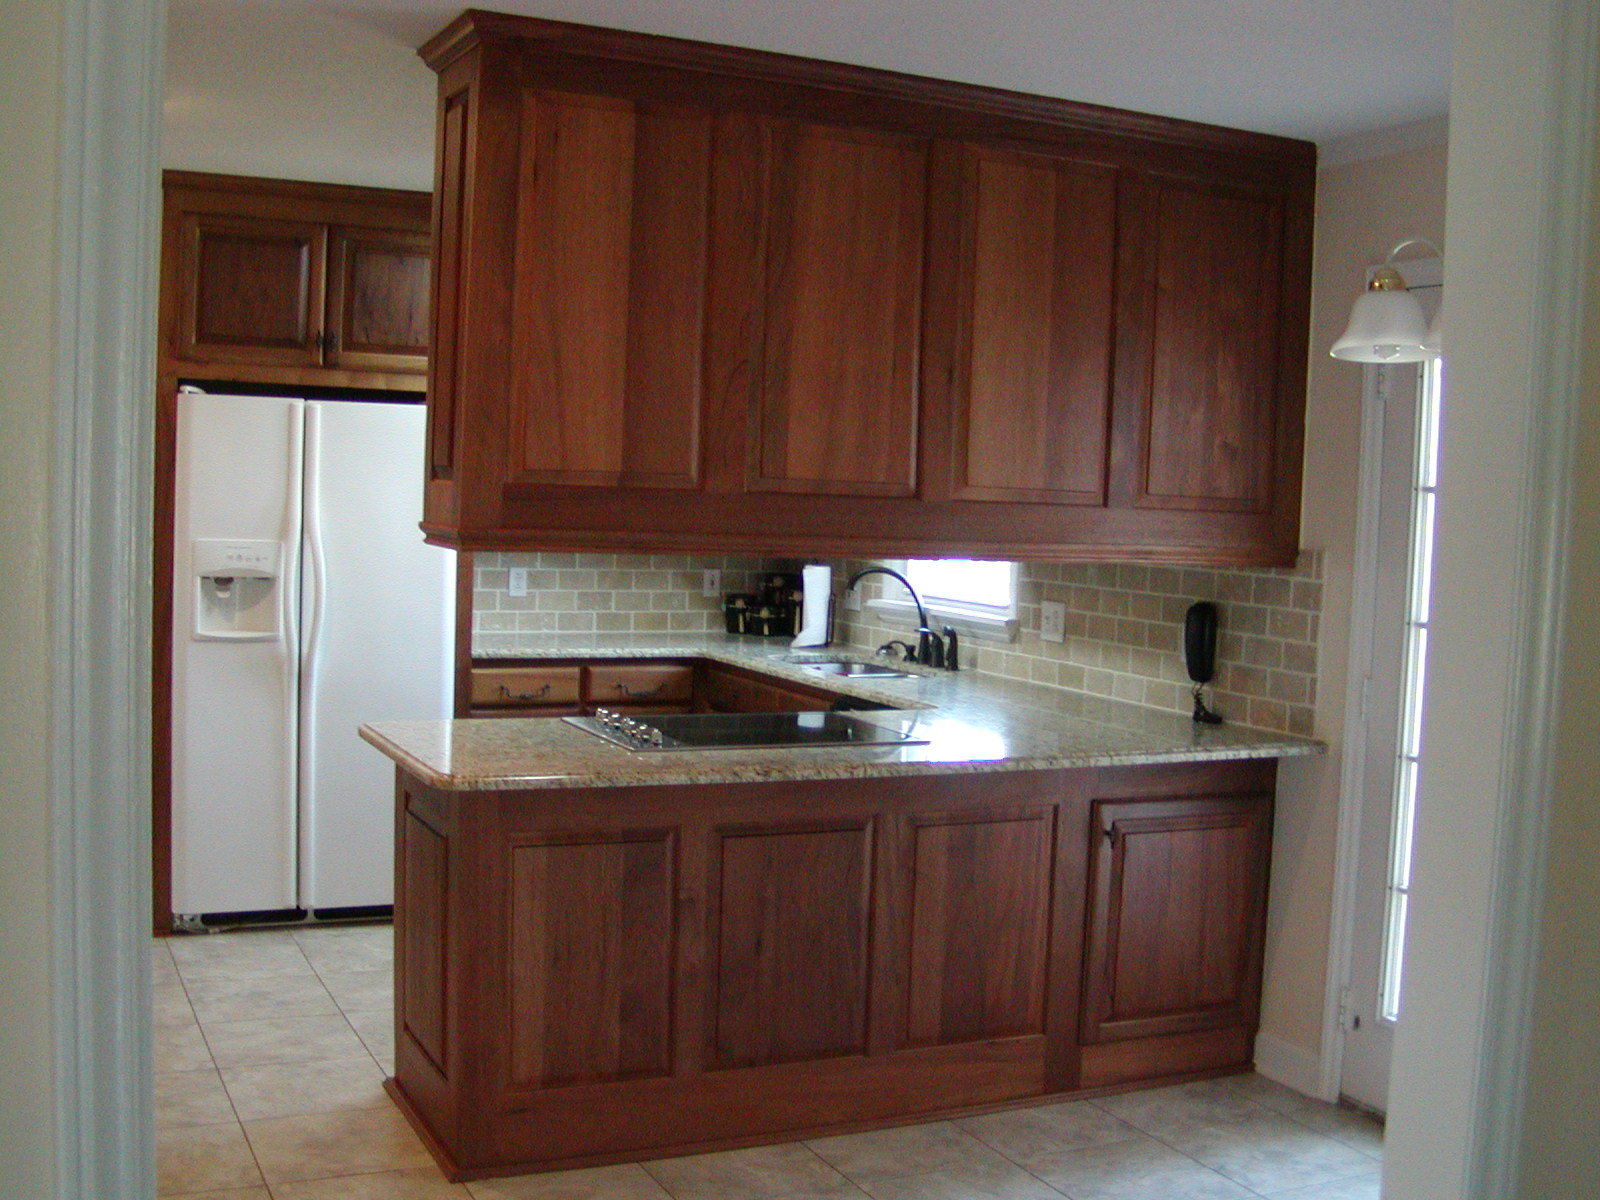 Mims Job — 336-342-9268 — J & S Home Builders and Cabinetry